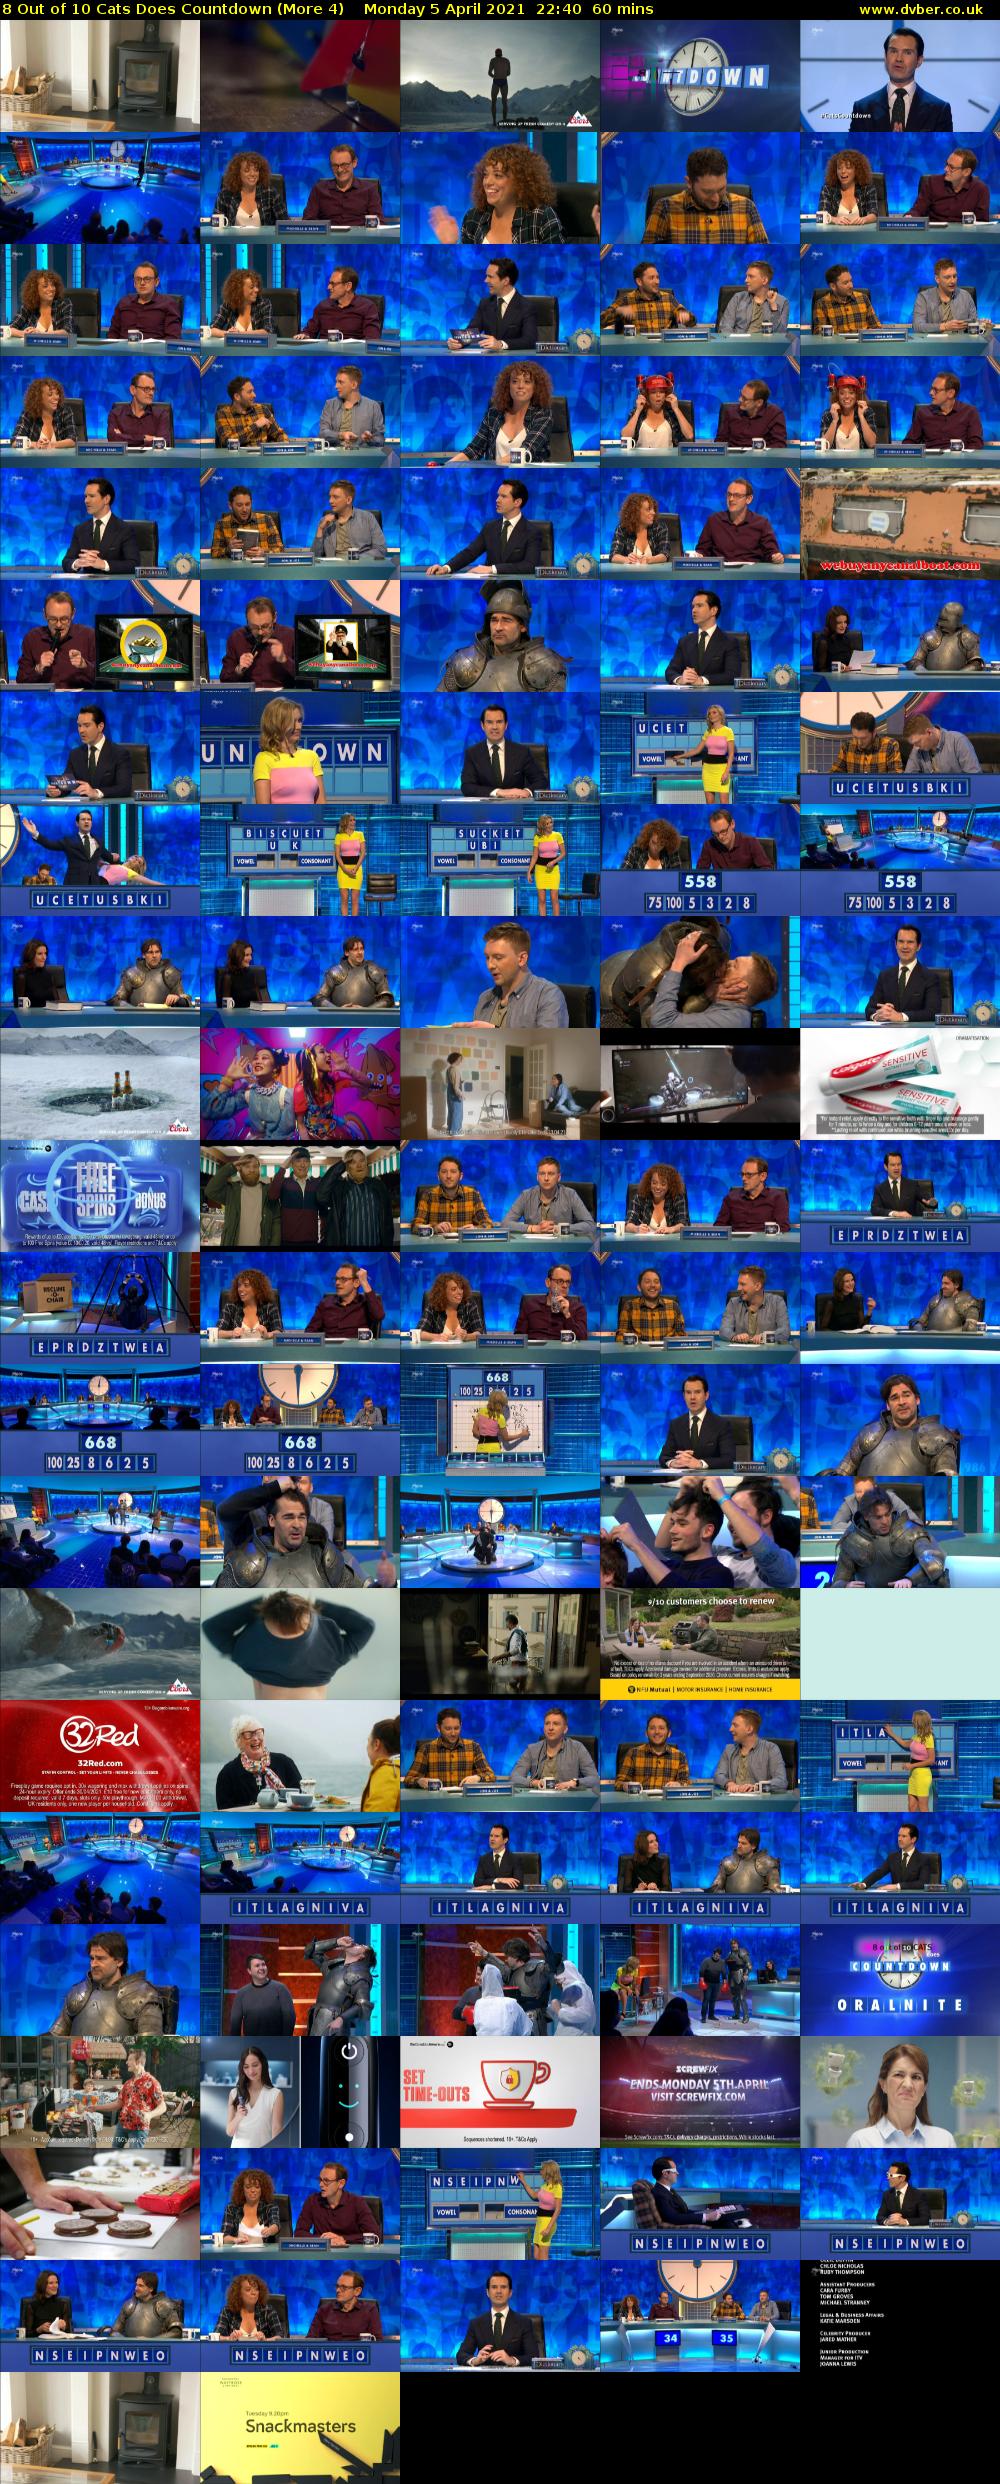 8 Out of 10 Cats Does Countdown (More 4) Monday 5 April 2021 22:40 - 23:40